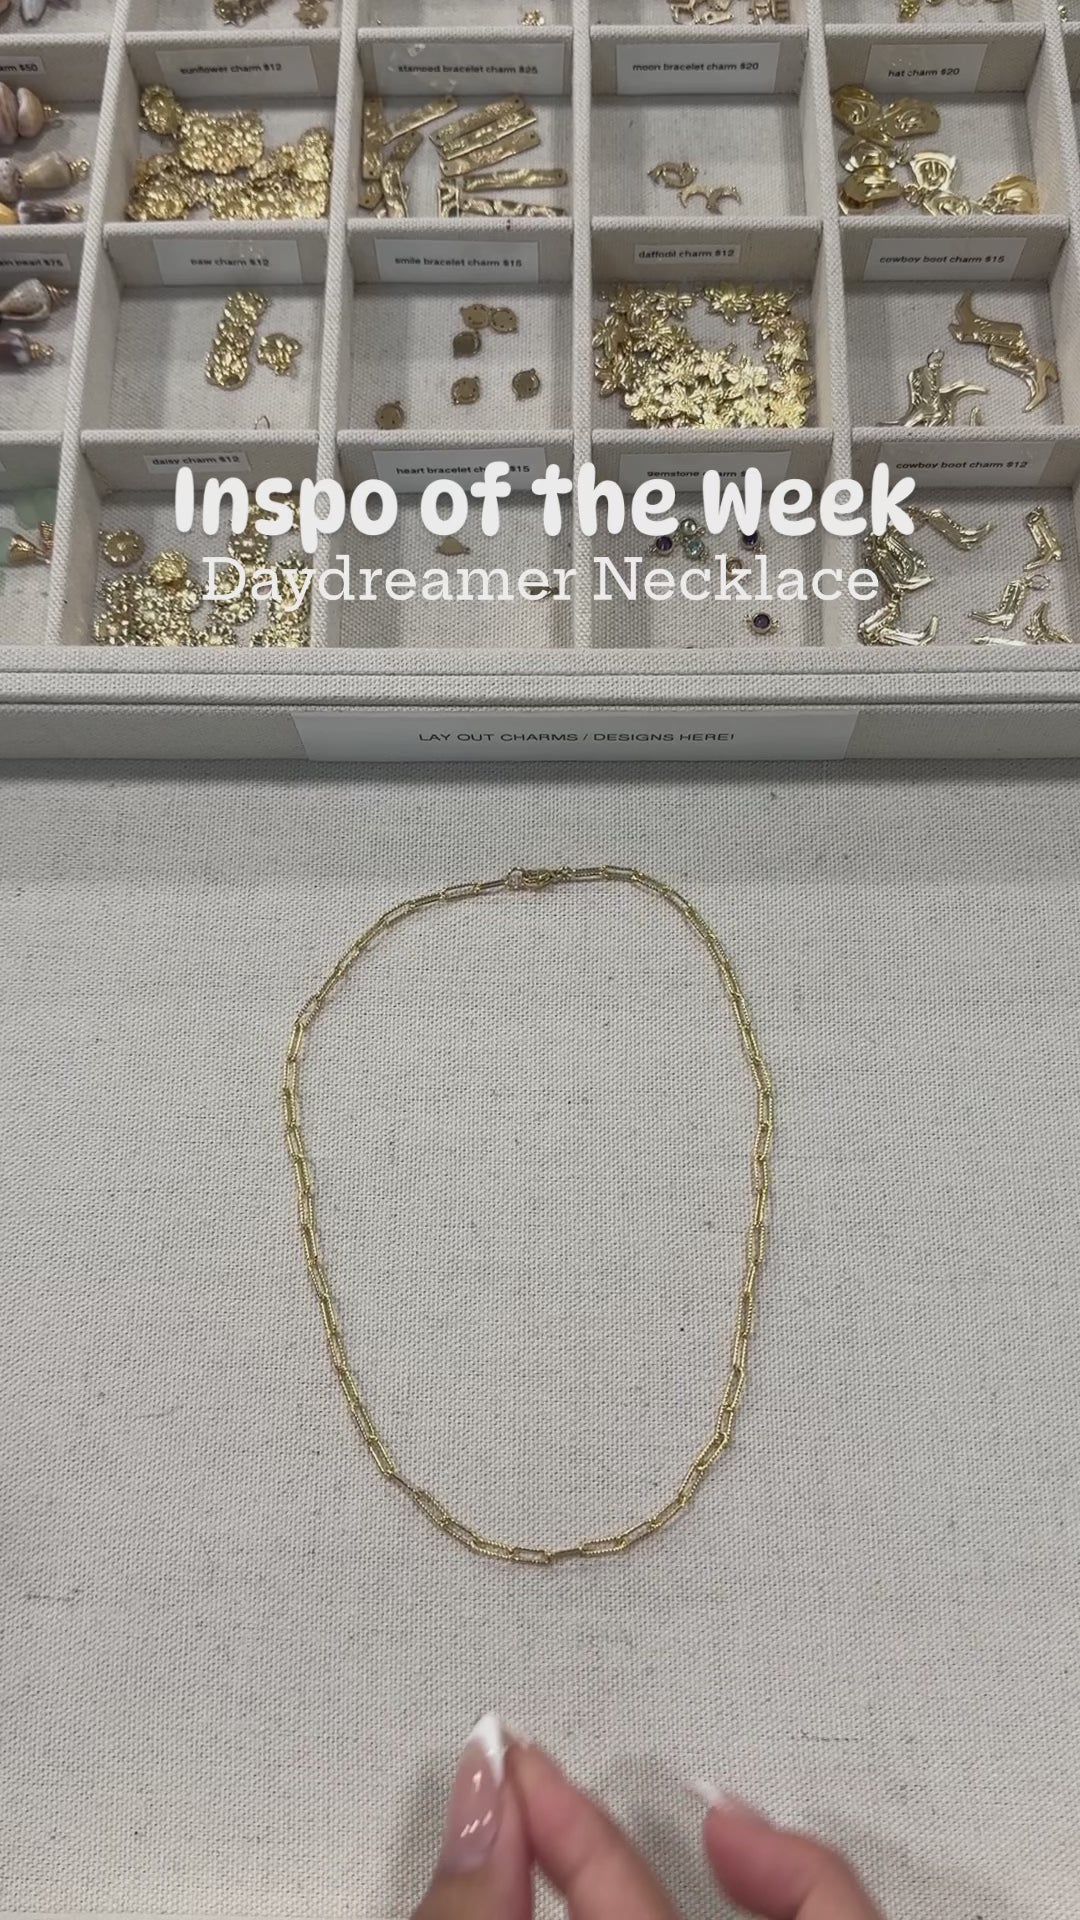 Daydreamer Necklace - Inspo of the Week